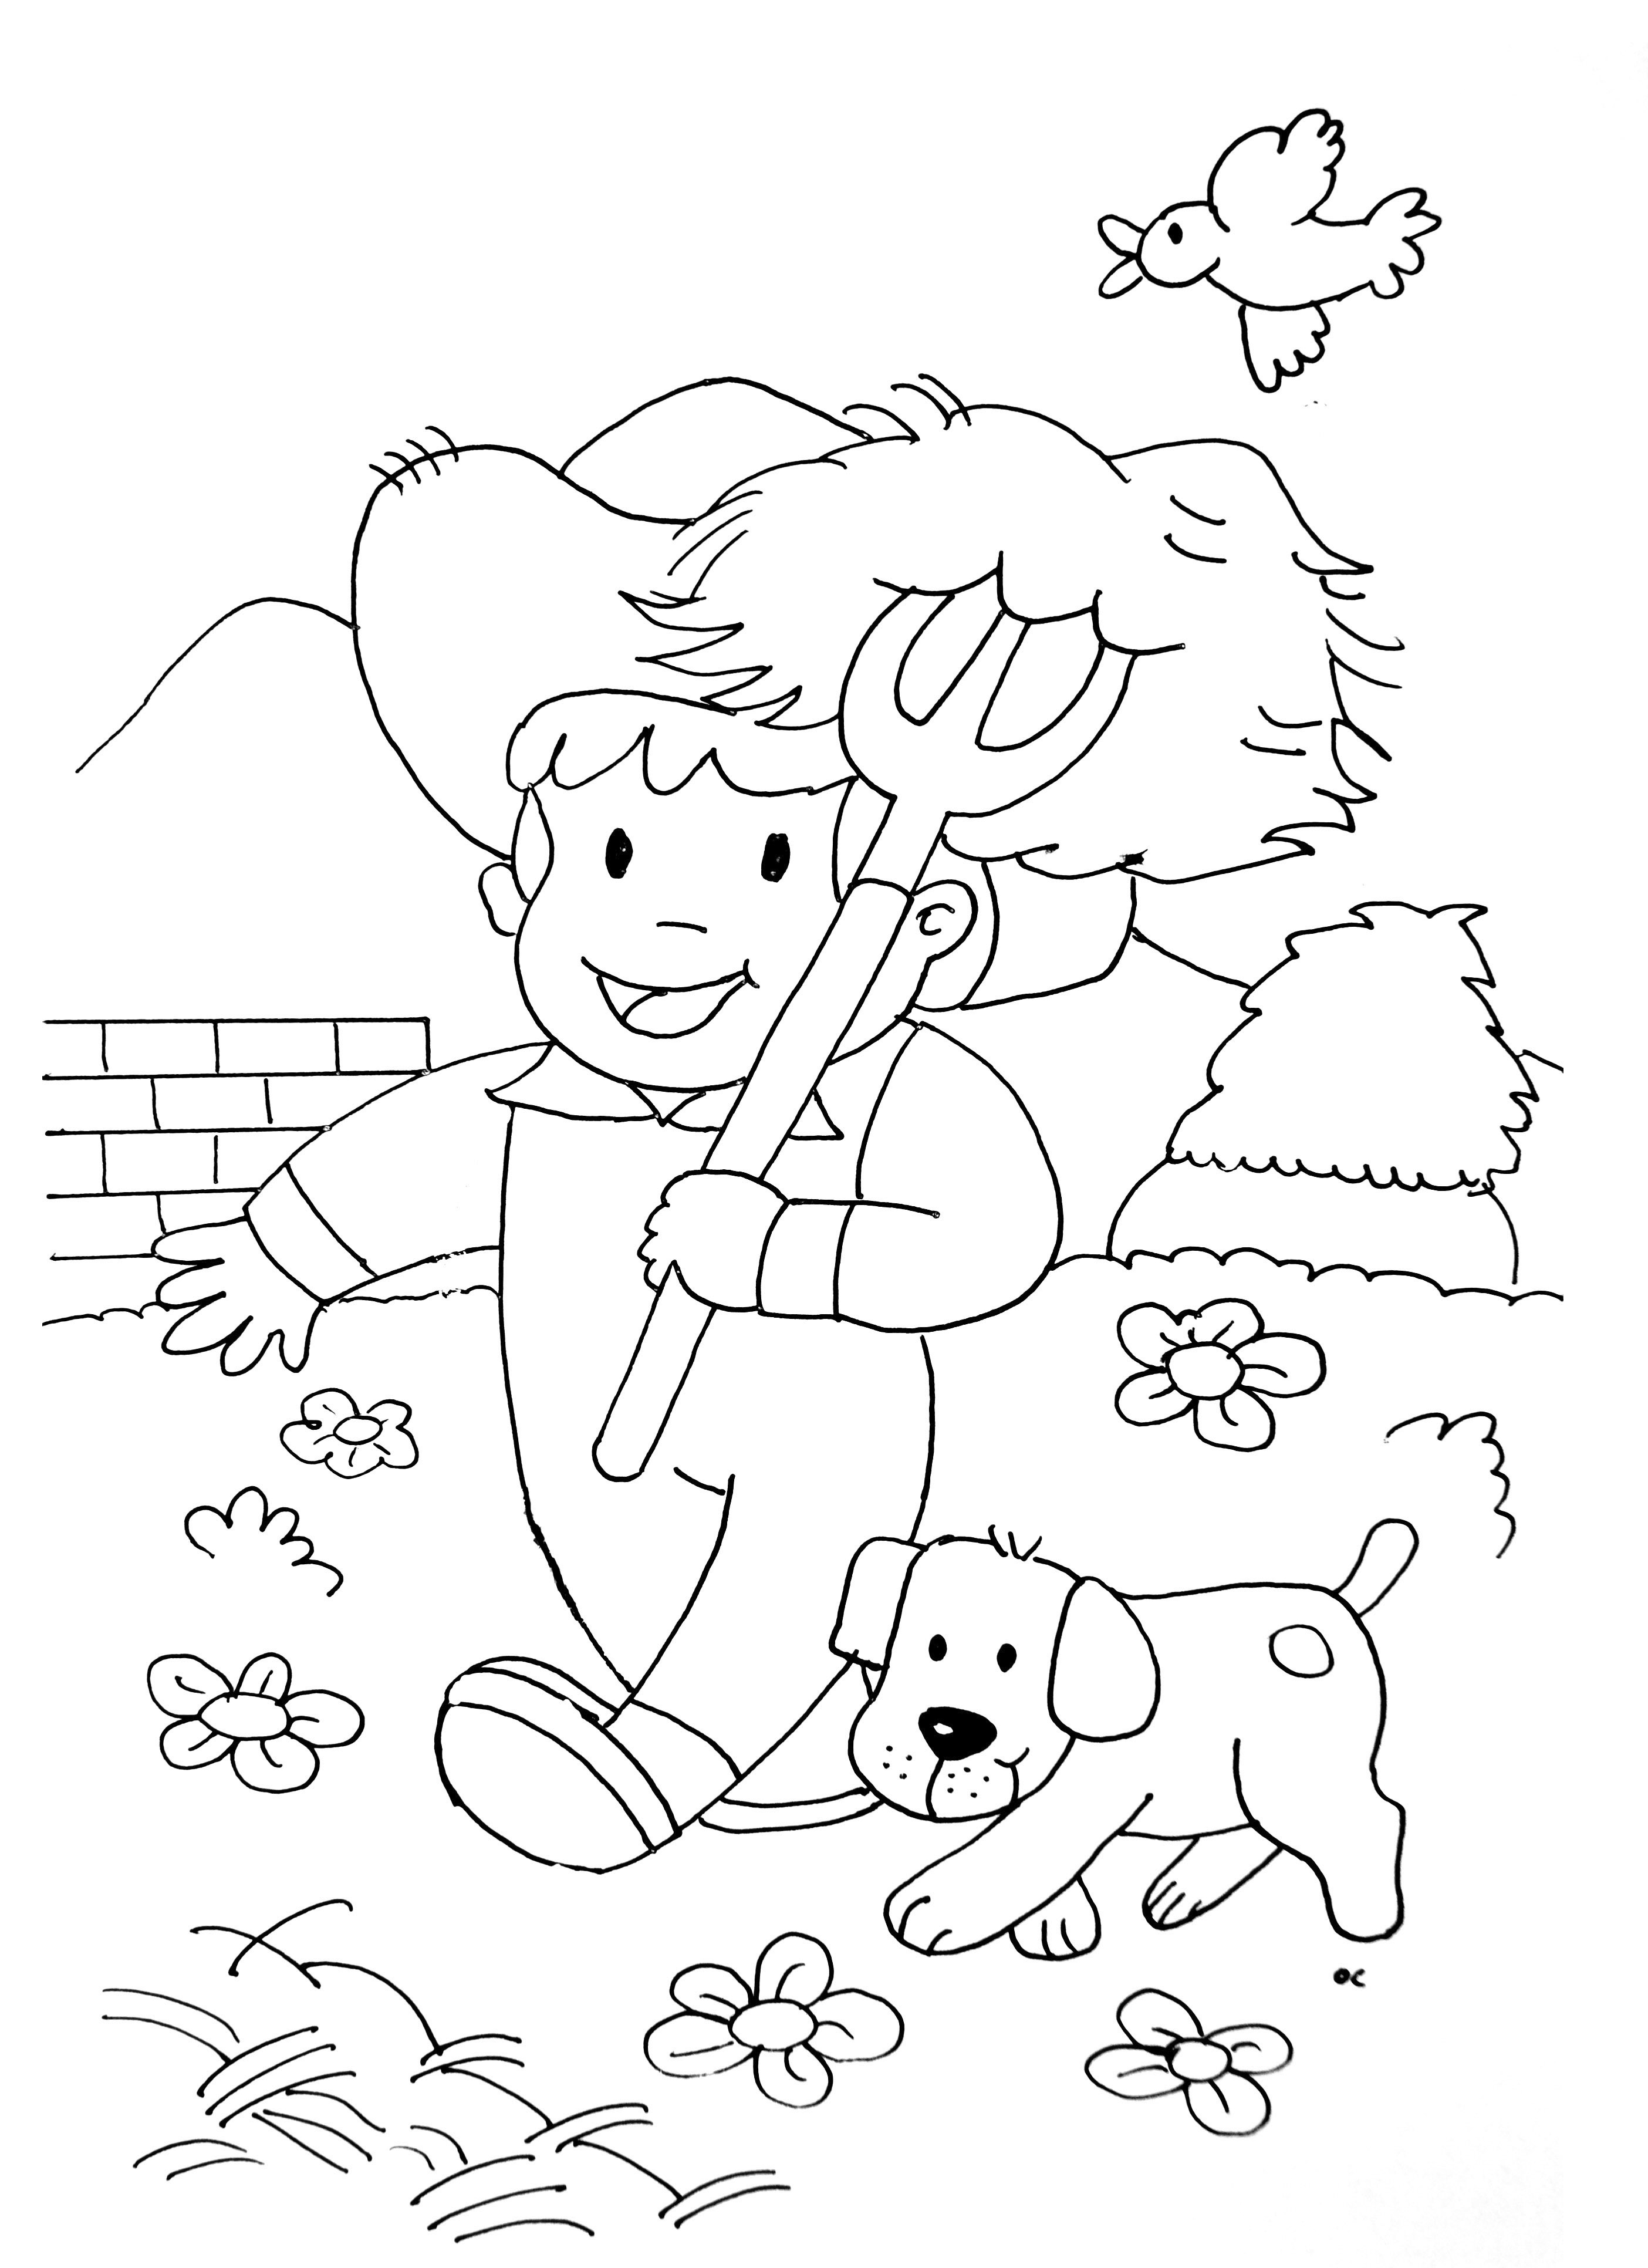 Farm coloring page to print - Farm Kids Coloring Pages - Page page/2/